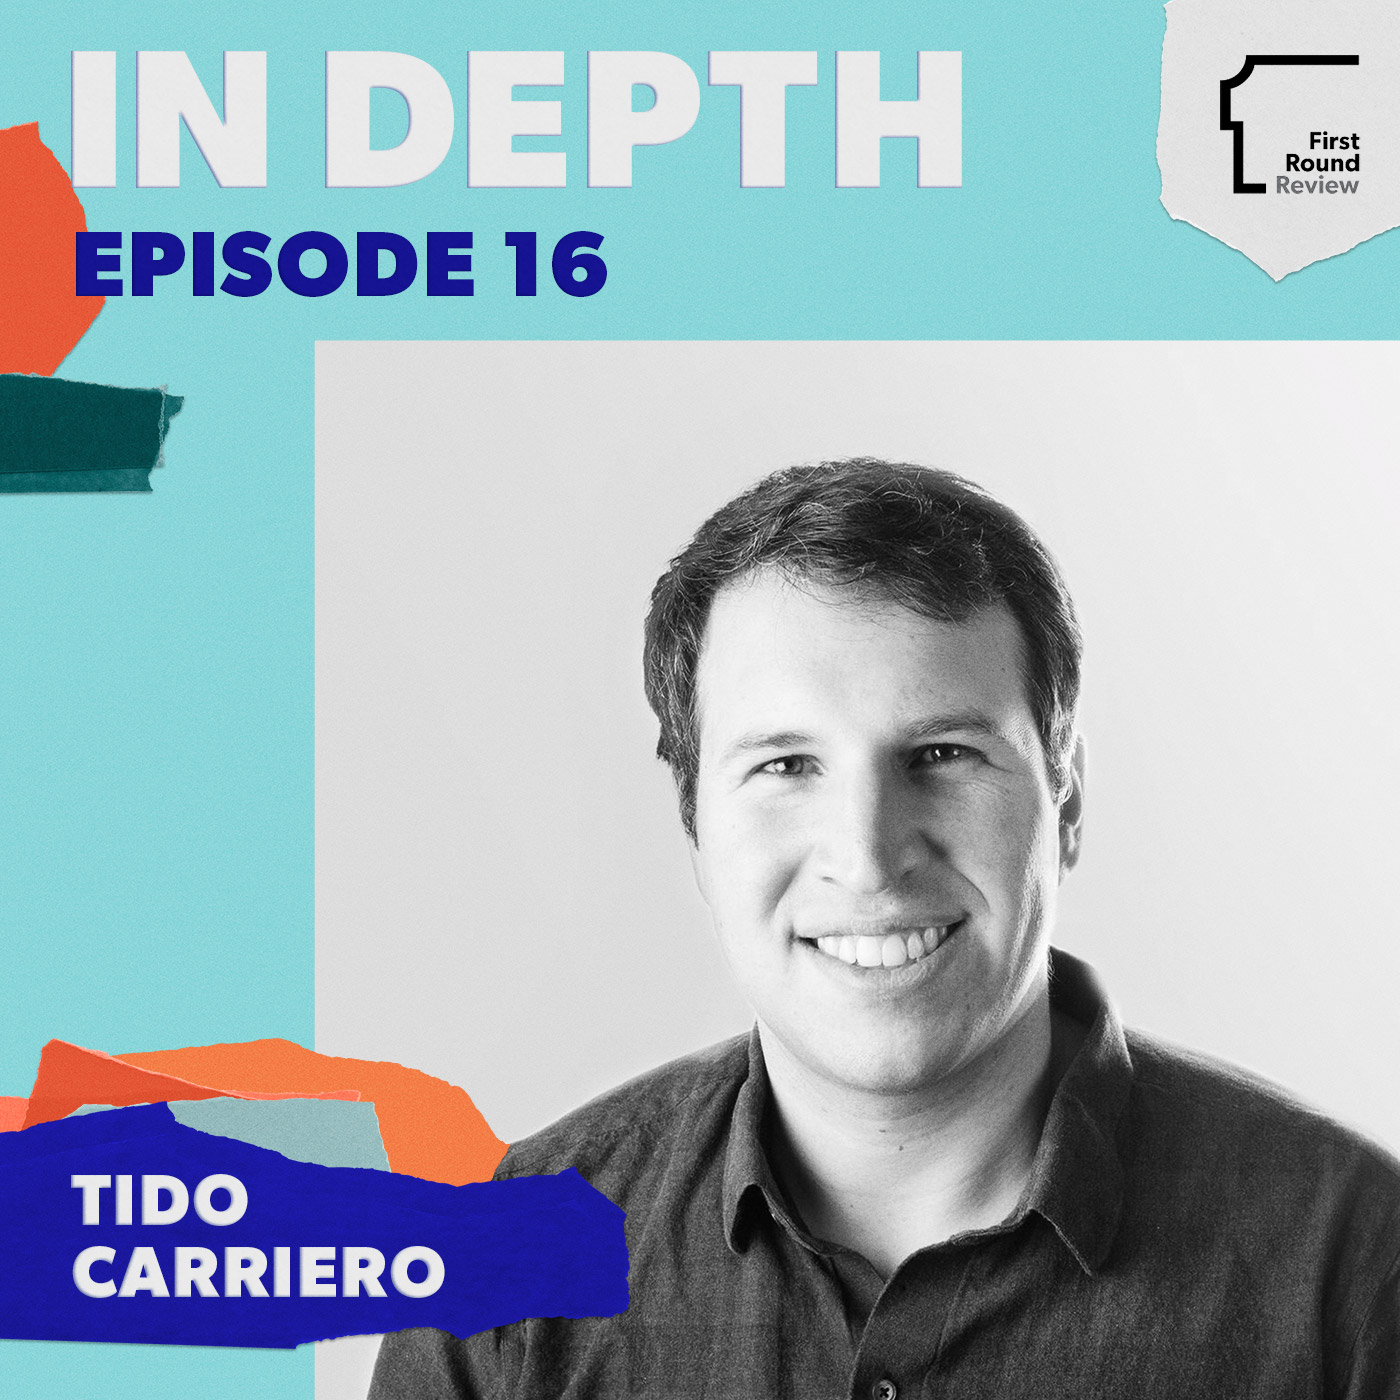 Building engineering orgs and new products at Segment, Dropbox & Facebook — Tido Carriero